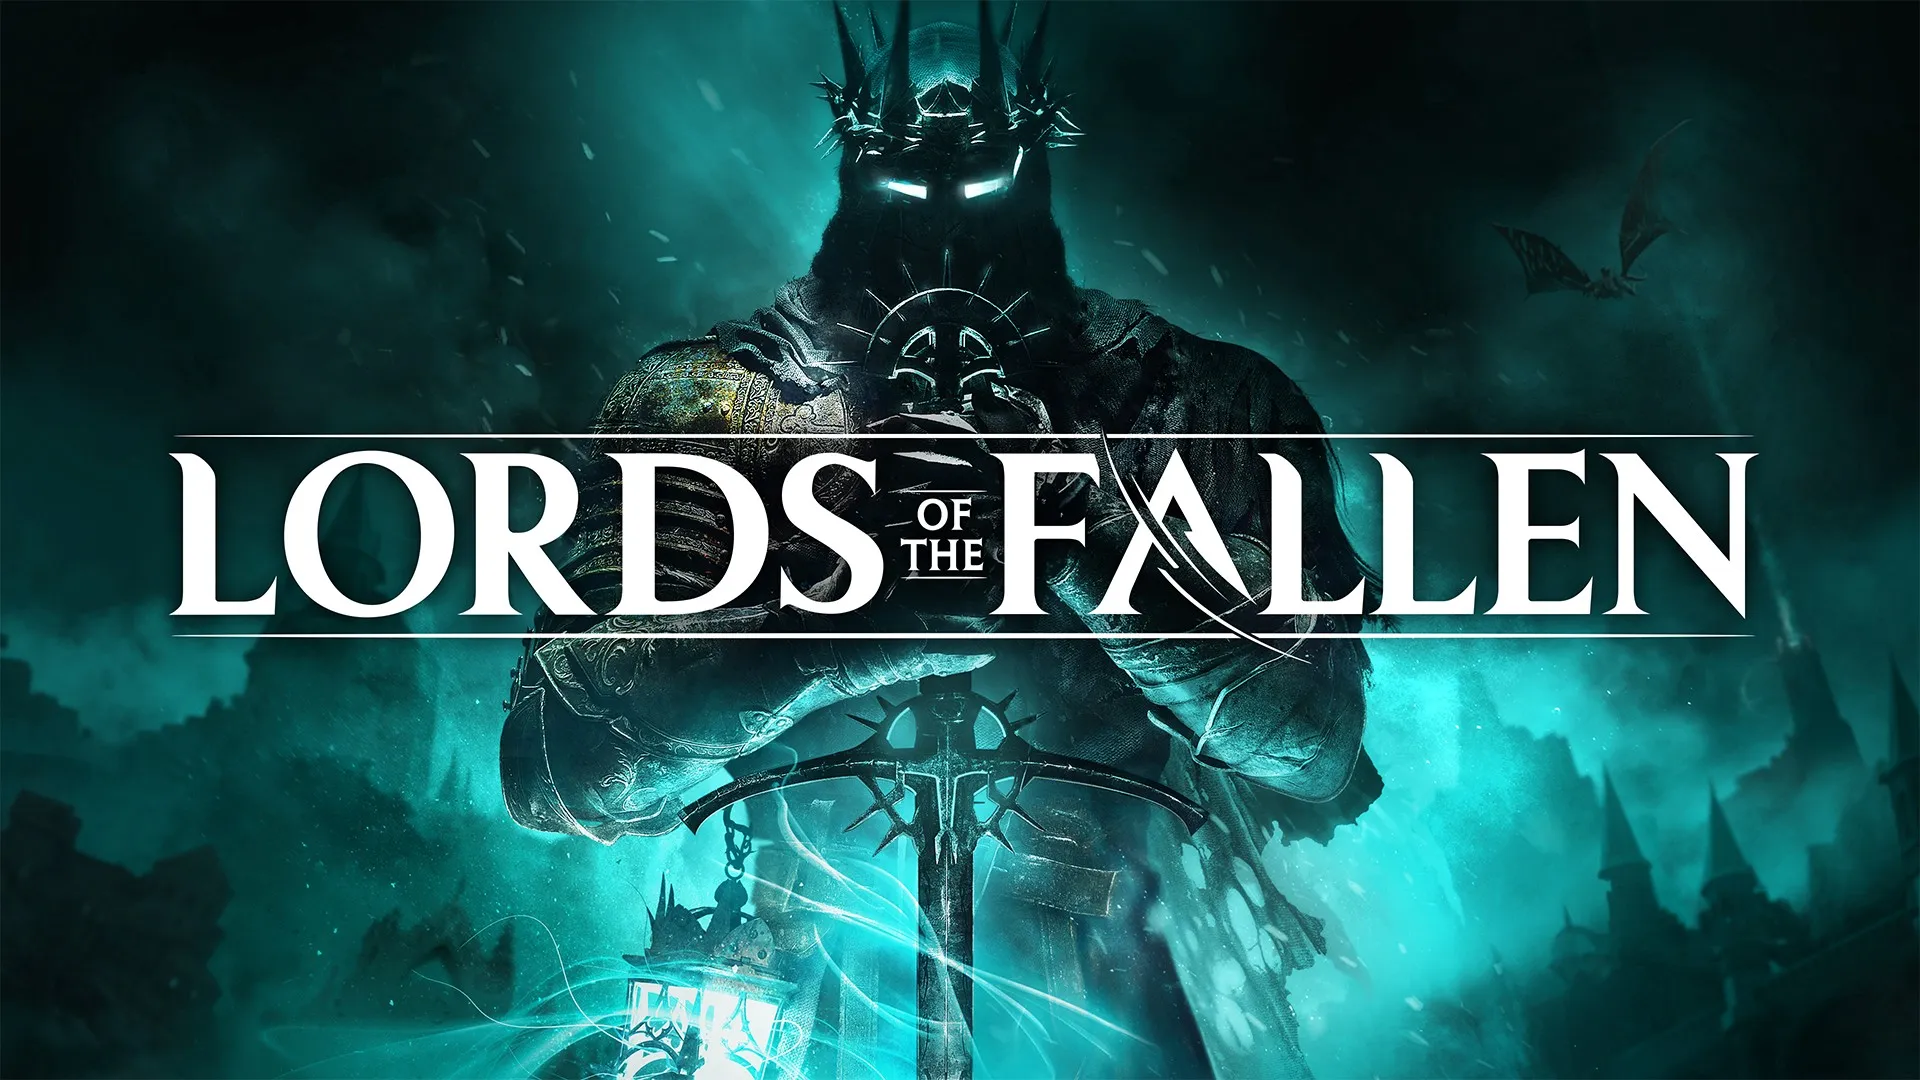 Lords of the Fallen Game Length How Long To Beat?